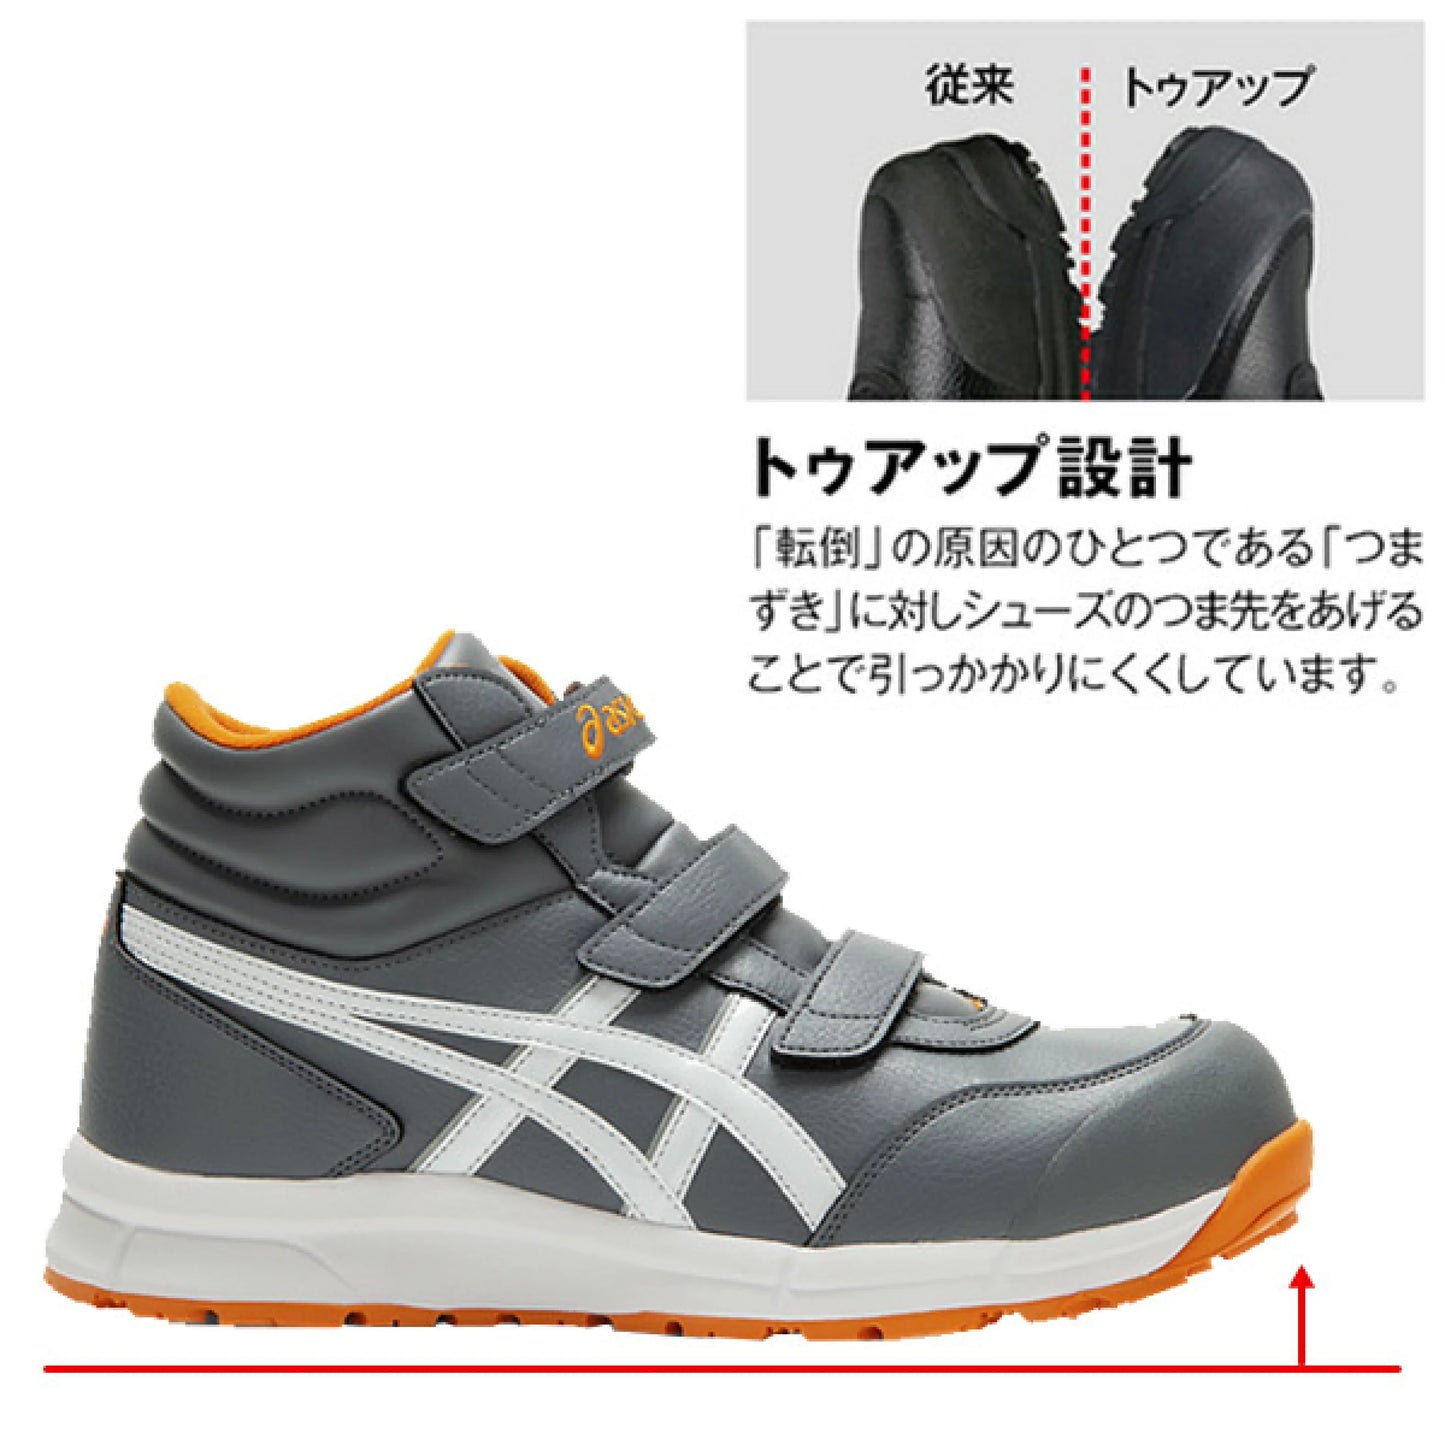 🎌Japan【Order】ASICS gray non-slip safety shoes mid-tube CP302